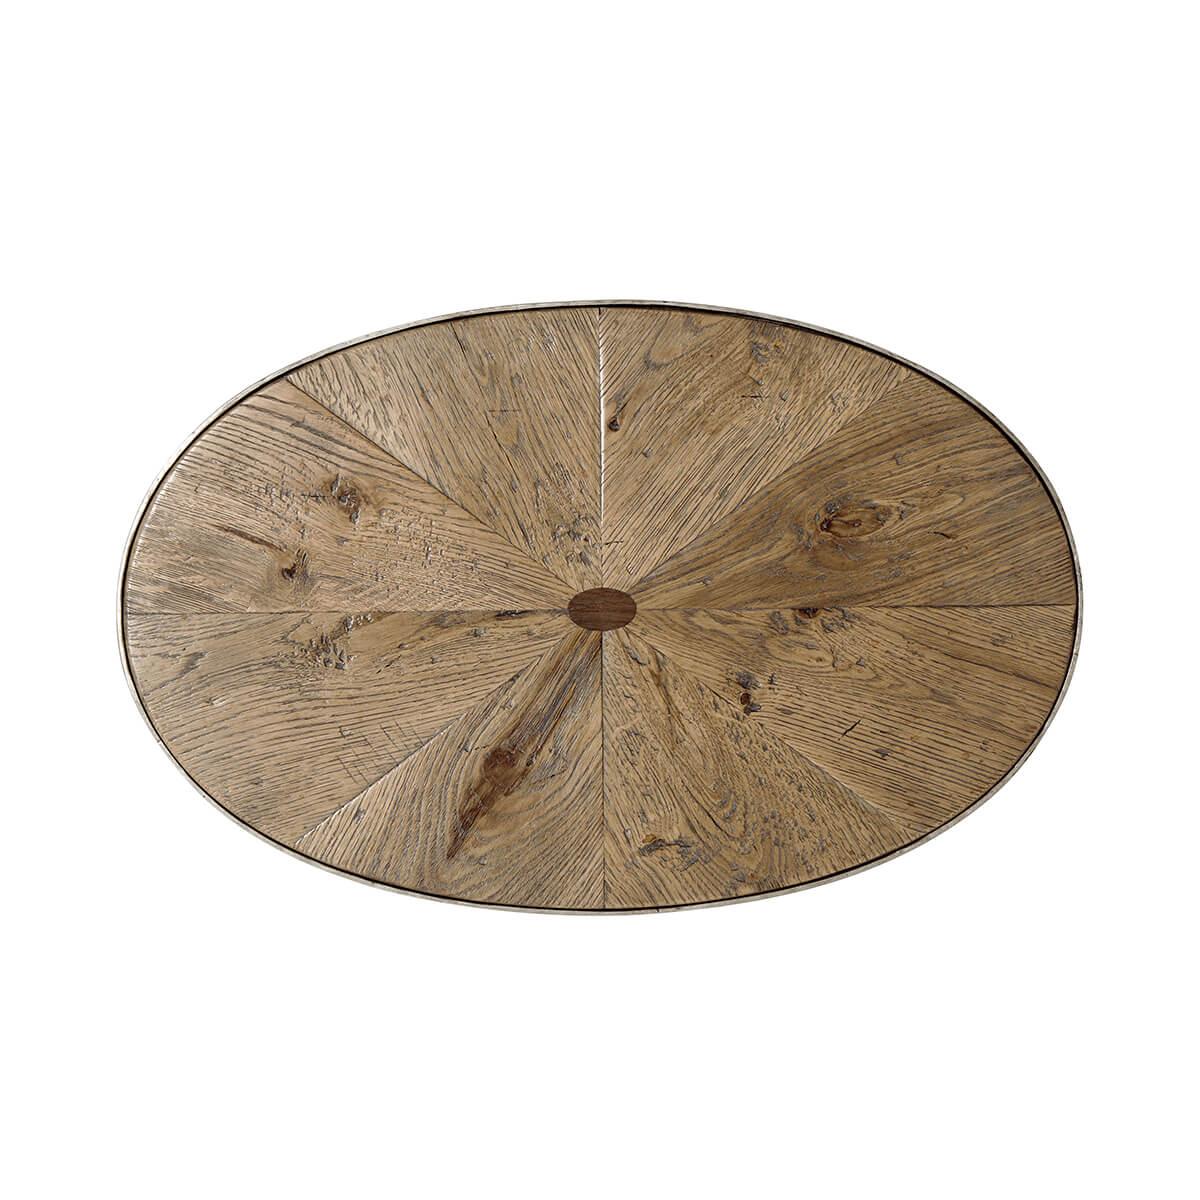 With a rustic inlaid sunburst top in a light echo oak finish, an oval cantilever form with a 'vintage' metal open frame base.

Dimensions: 14